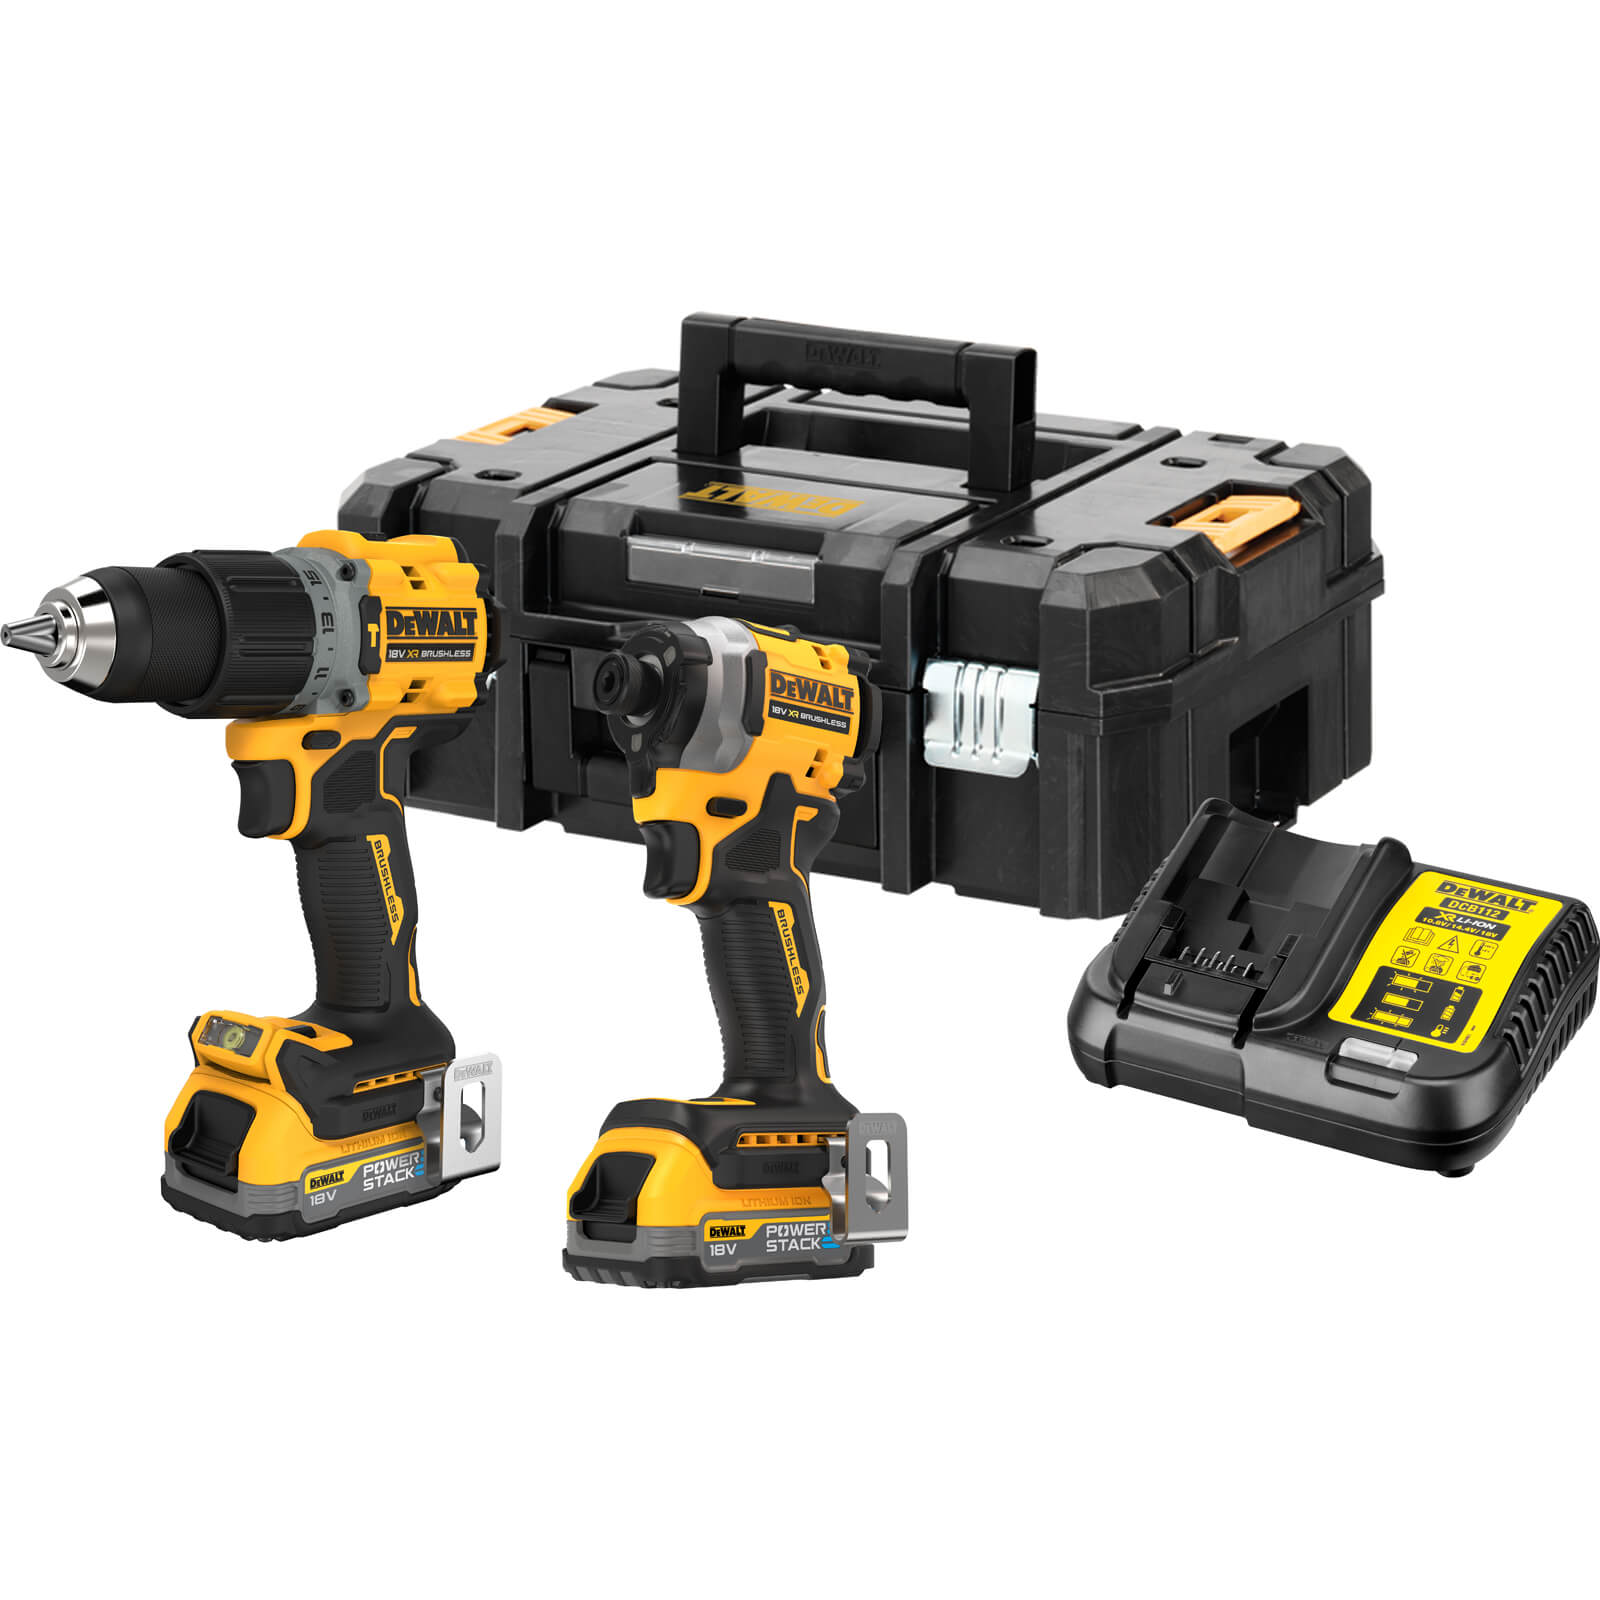 DeWalt DCK2050 18v XR Brushless Combi Drill and Impact Driver 2 x 1.7ah Li-ion Powerstack Charger Case